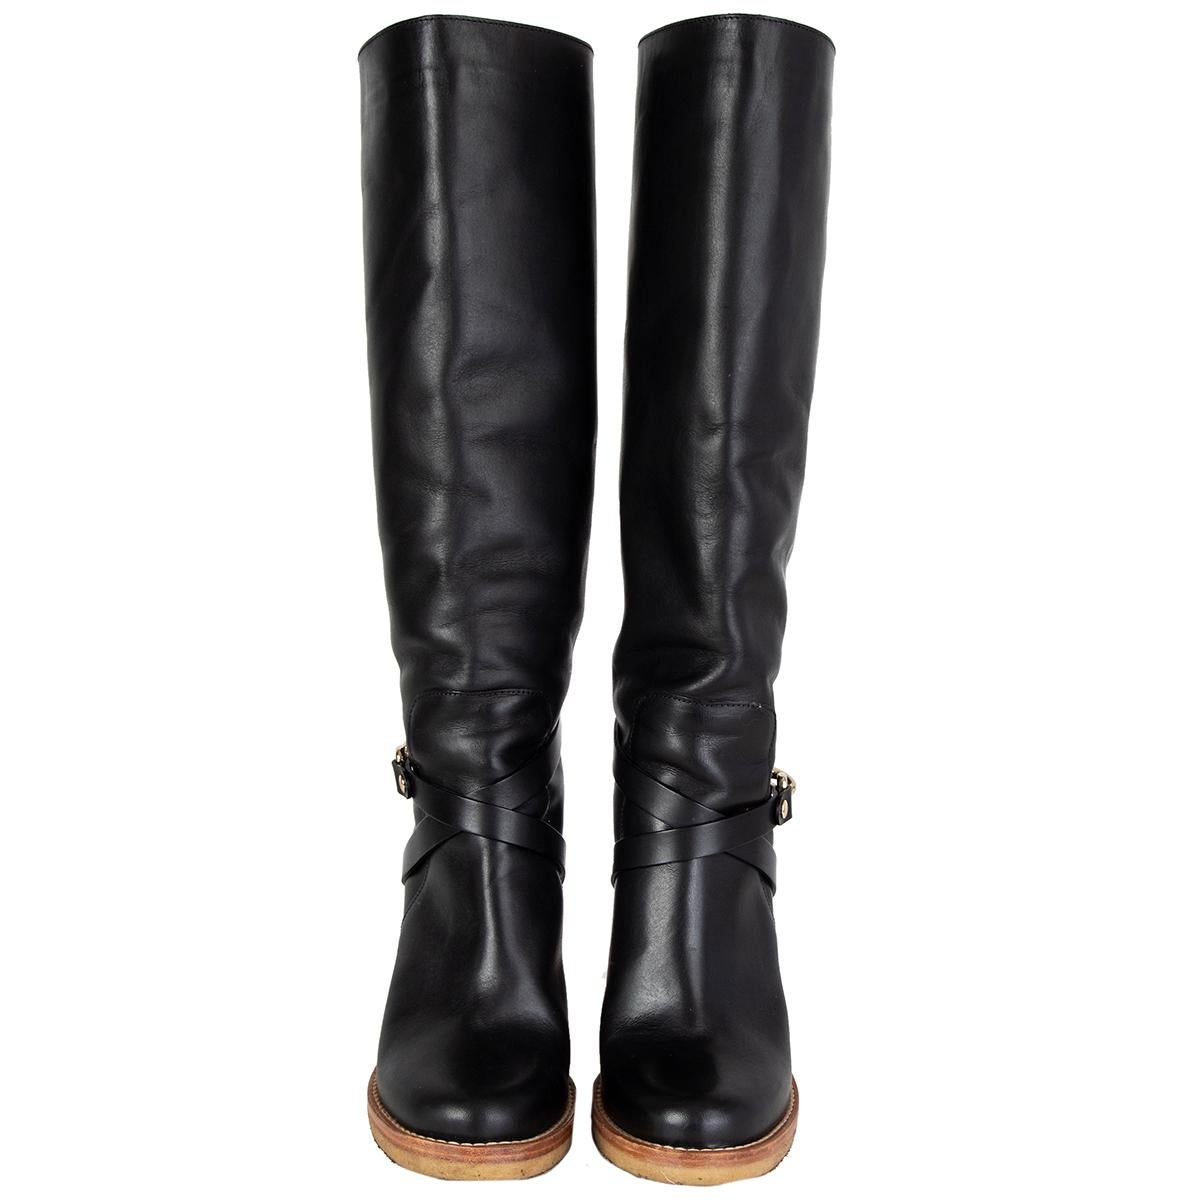 100% authentic Mulberry 'Dorset' knee high boots in black calfskin featuring subtle crossover strap detailing and a signature dog-leash clasp. Have been worn and are in excellent condition. 

Measurements
Imprinted Size	40
Shoe Size	40
Inside